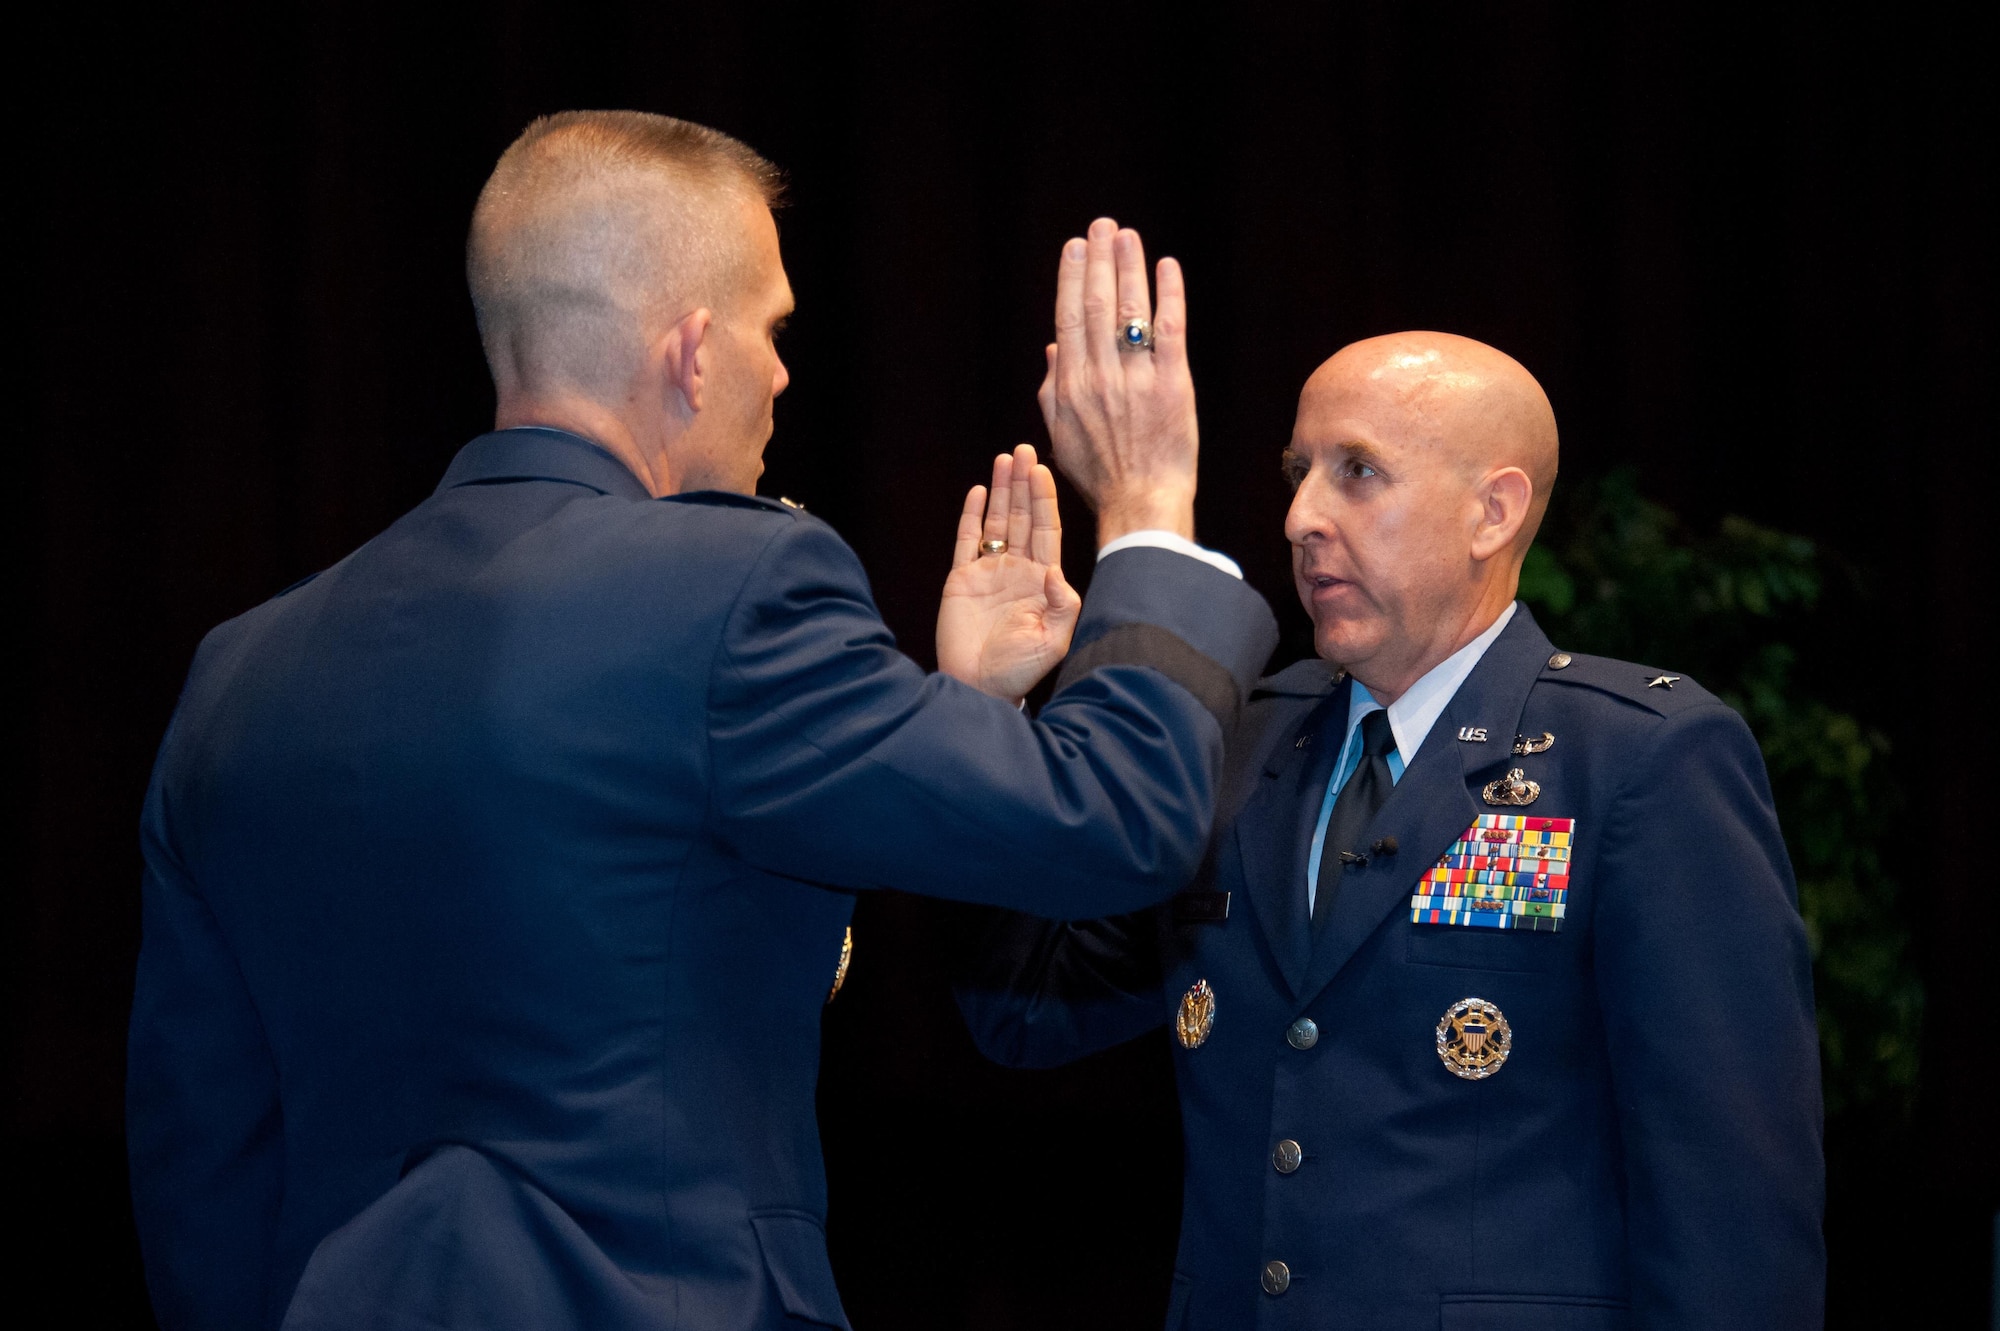 Lt. Gen. Steven Kwast, commander Air University administers the oath of office to Brig. Gen. Edward Thomas in the Non Commissioned Officer Academy at Maxwell Air Force Base, May 12, 2016.  Thomas is the commander of the Thomas N. Barnes Center for Enlisted Education. (US Air Force photo by Melanie Rodgers Cox) 